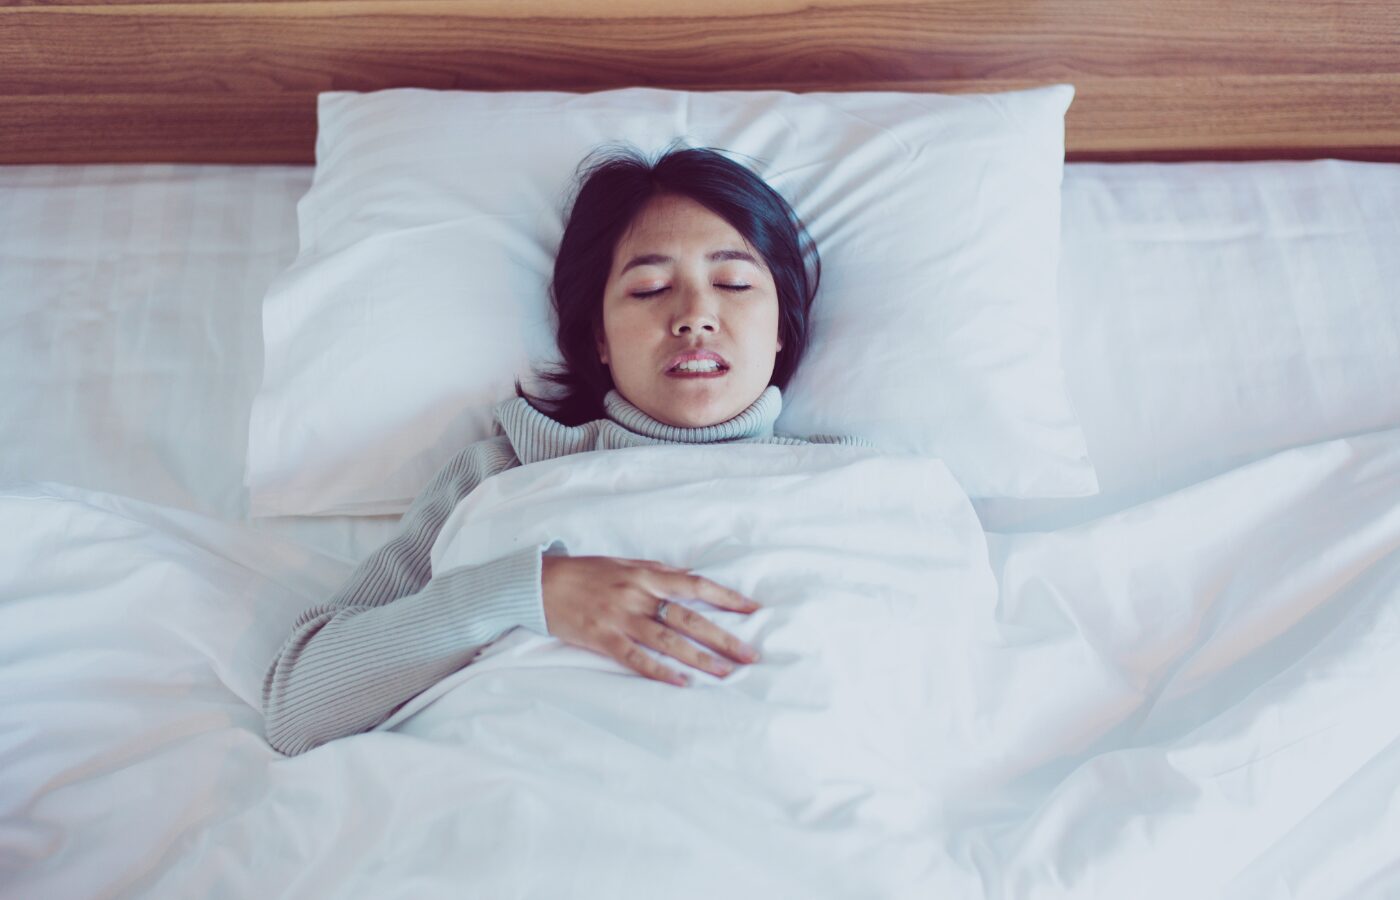 Woman in a bed with white sheets and eyes closed. Grinding her teeth.